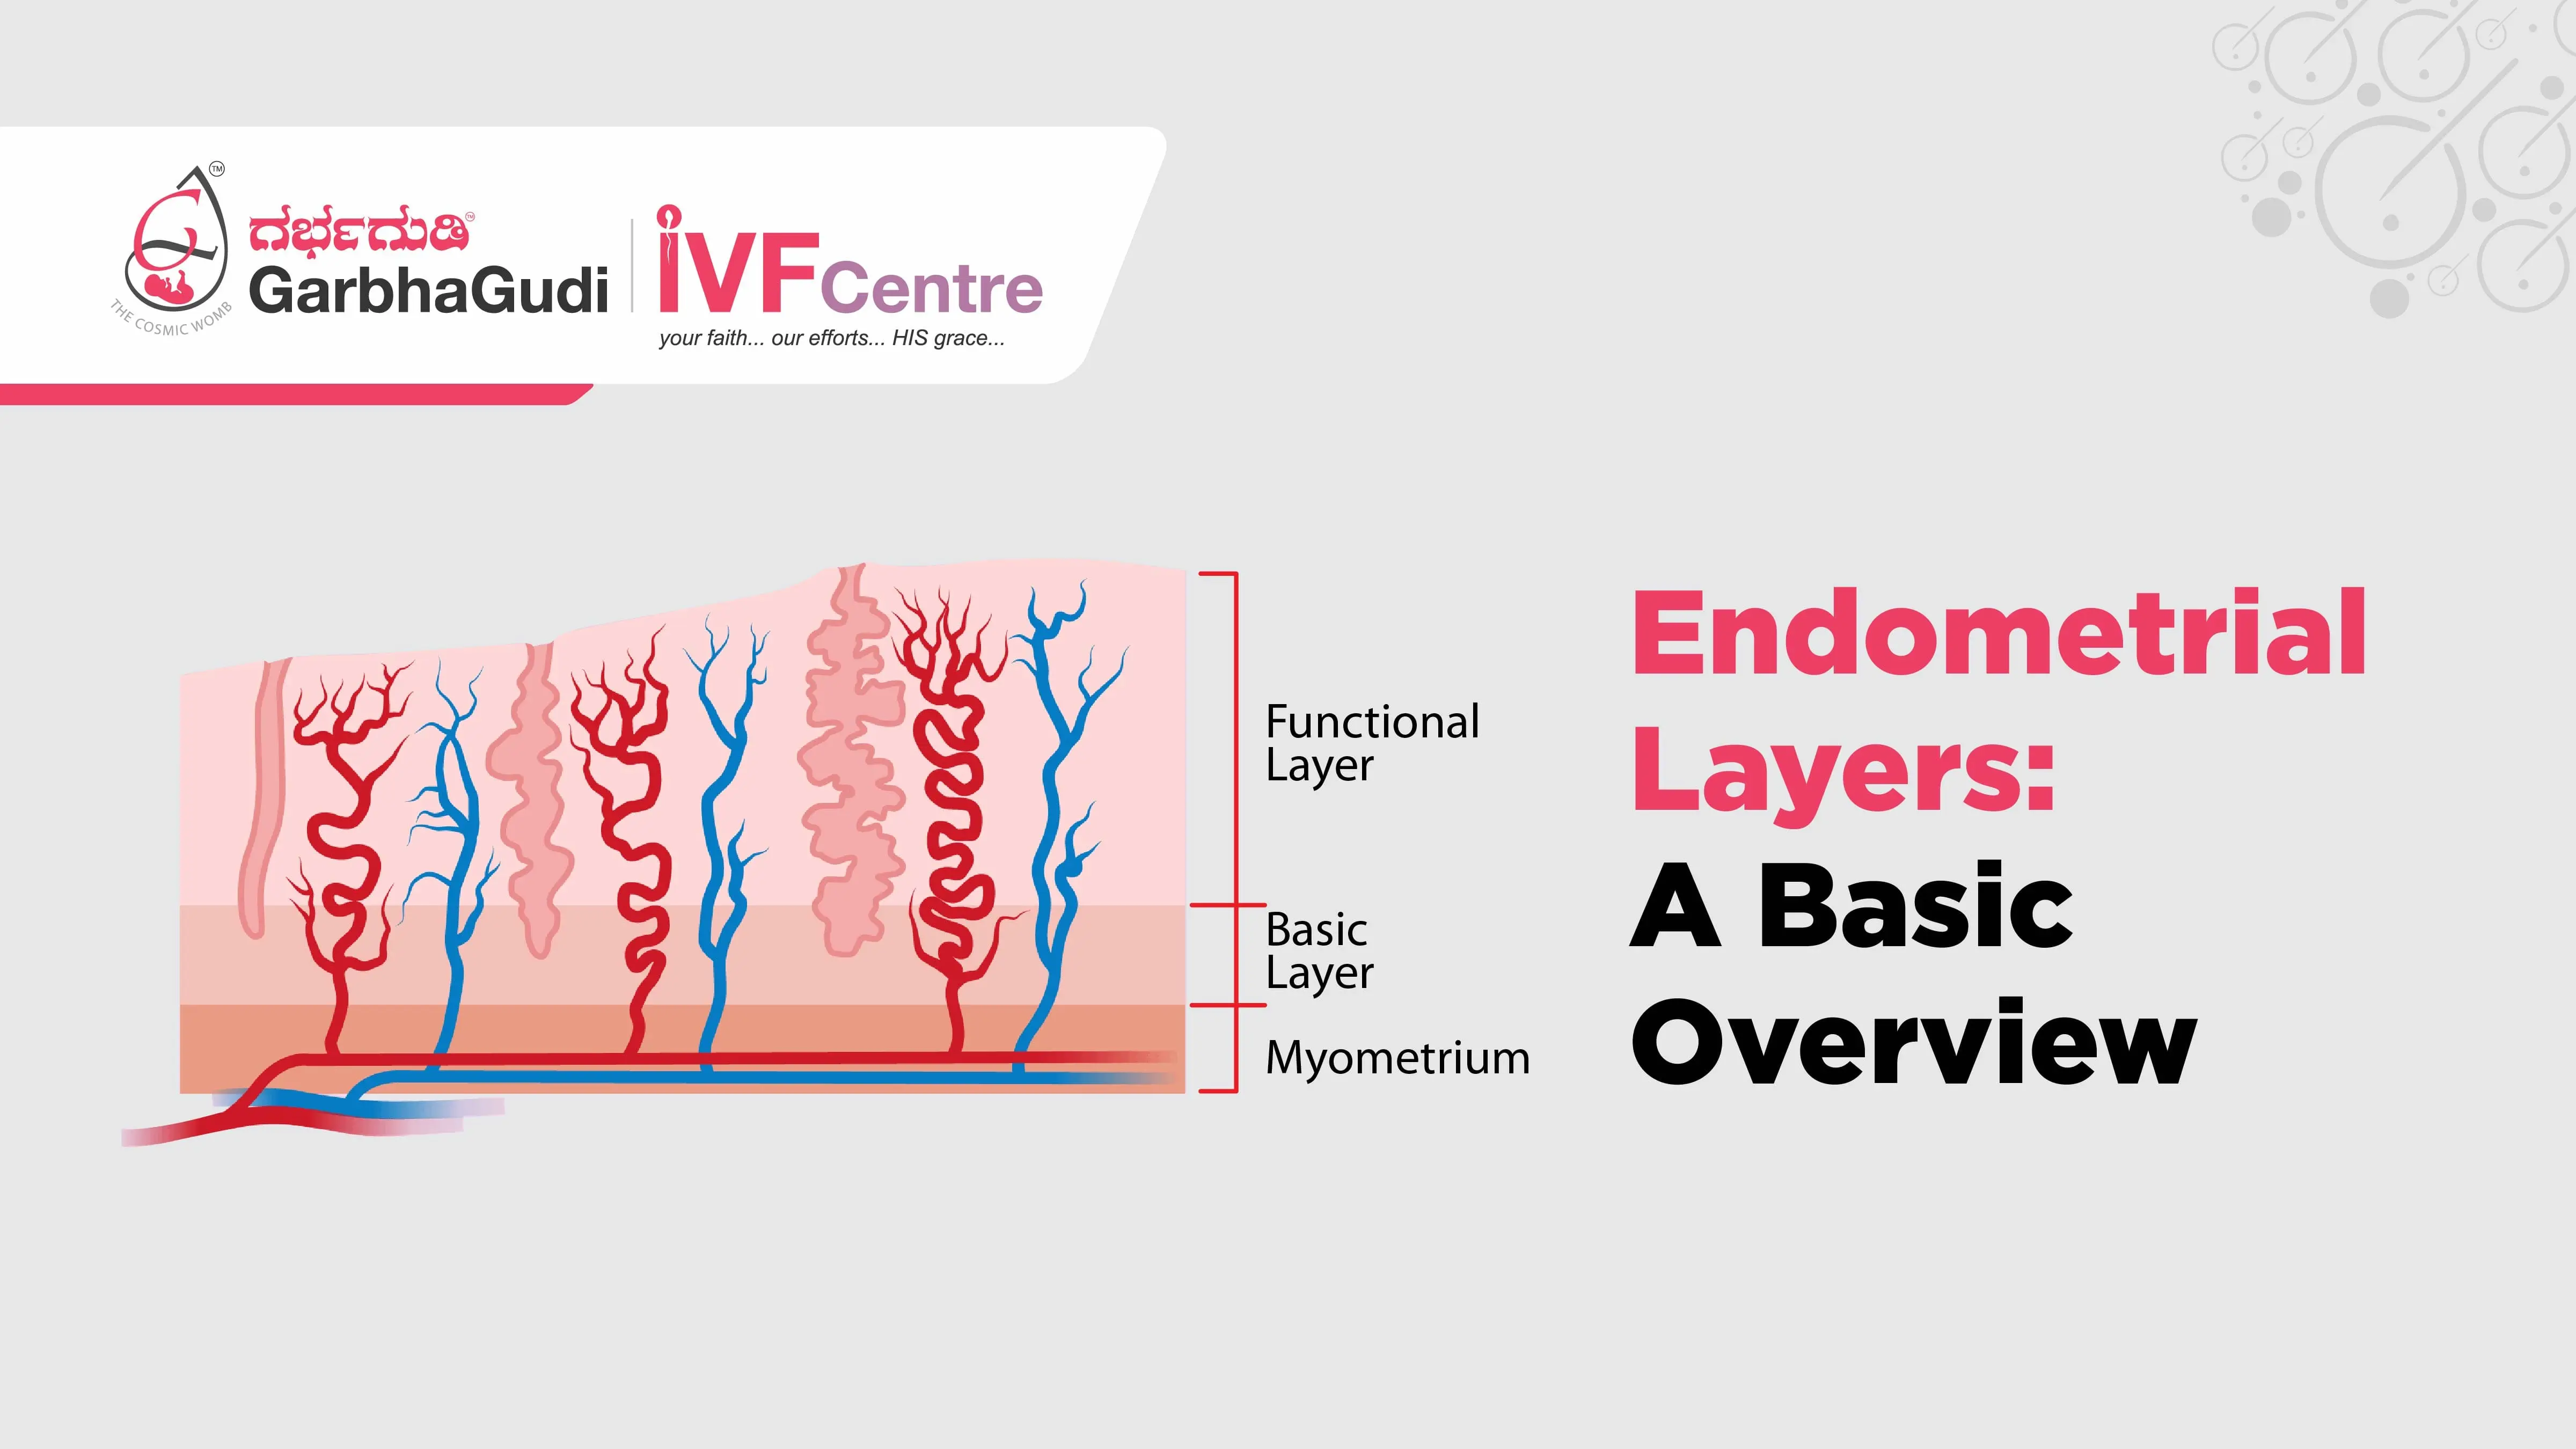 Endometrial Layers - A Basic Overview